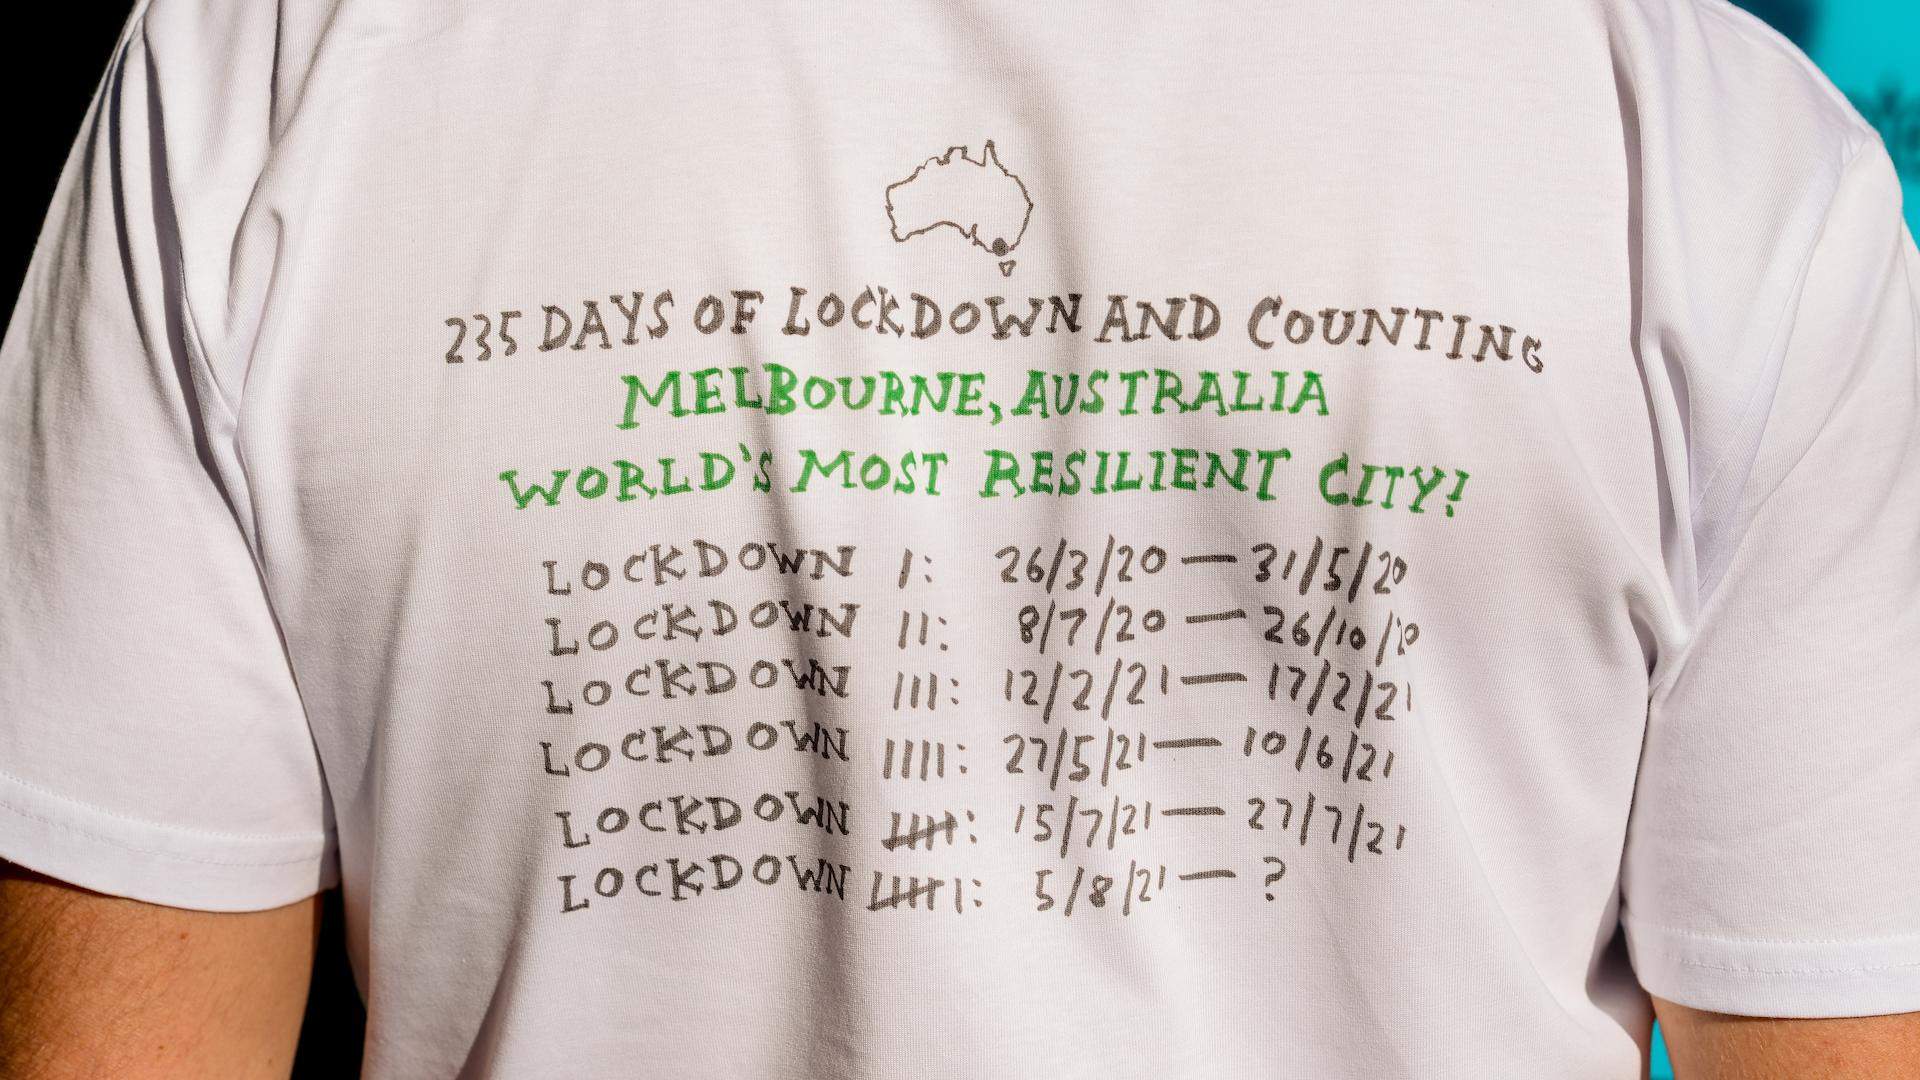 Melbourne's New Limited-Edition Lockdown Commemoration T-Shirt Features Artwork by Oslo Davis